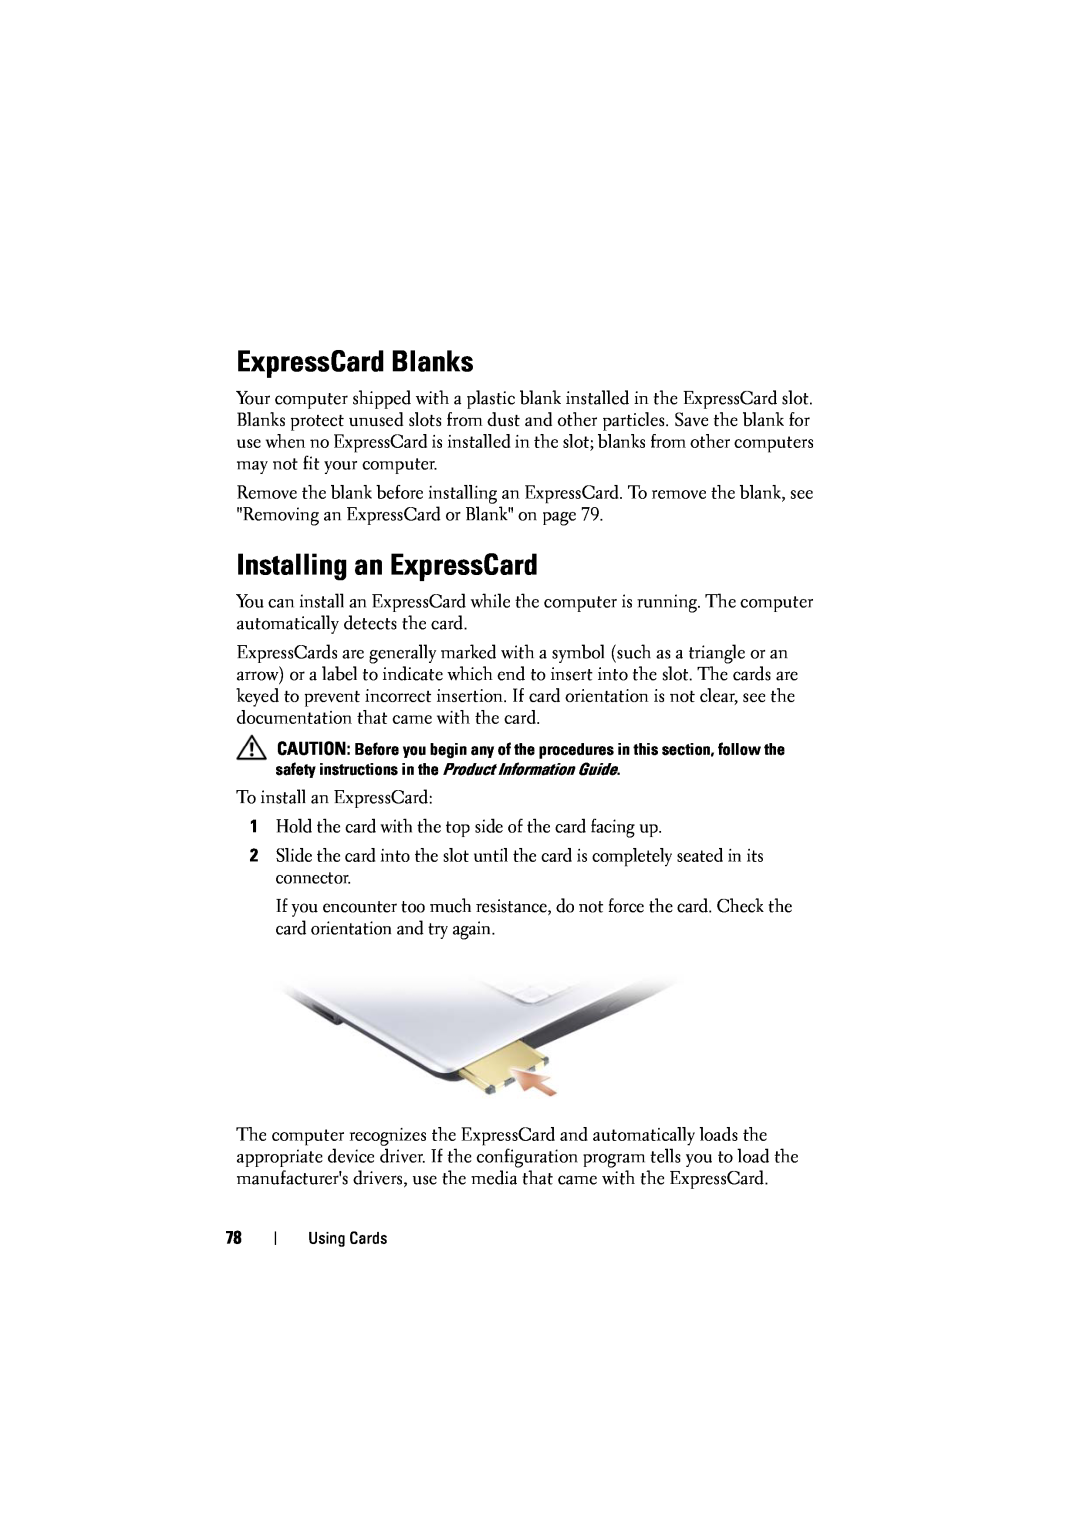 Dell 1525, 1526 owner manual ExpressCard Blanks, Installing an ExpressCard 